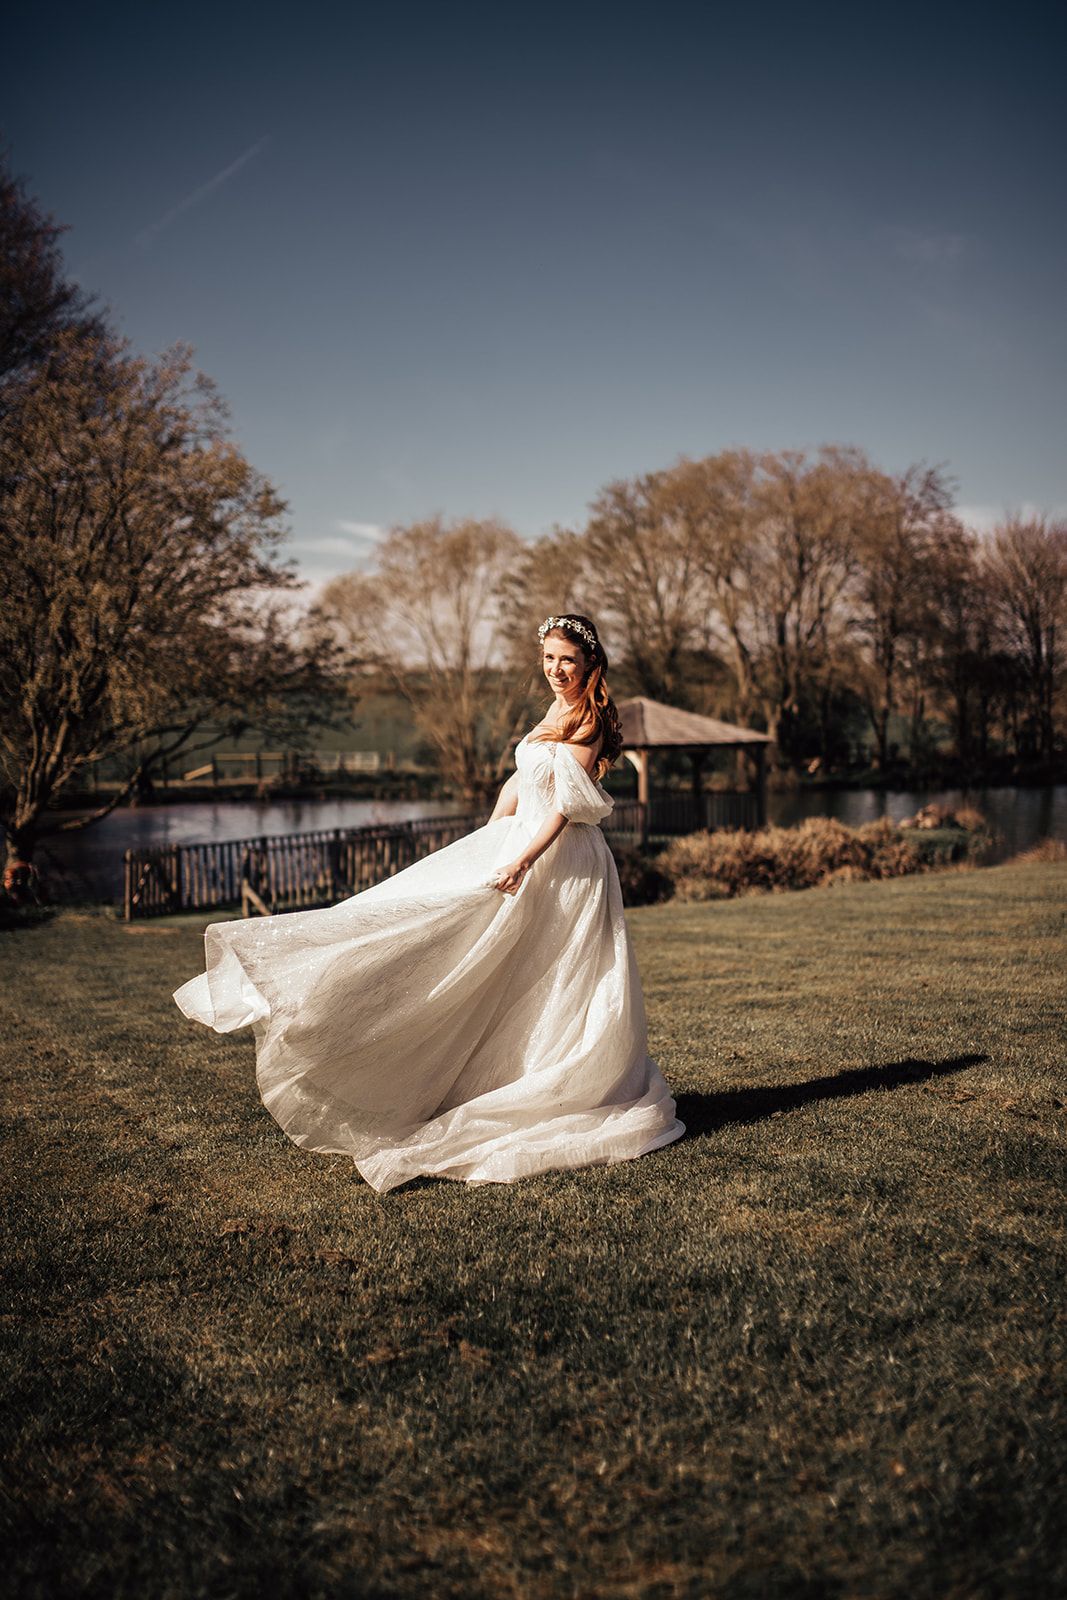 A bride stood on the lawn in front of the lake and gazebo at Furtho Manor Farm sweeping her dress and looking over her shoulder. Photo thanks to Francesca Checkley Photography.